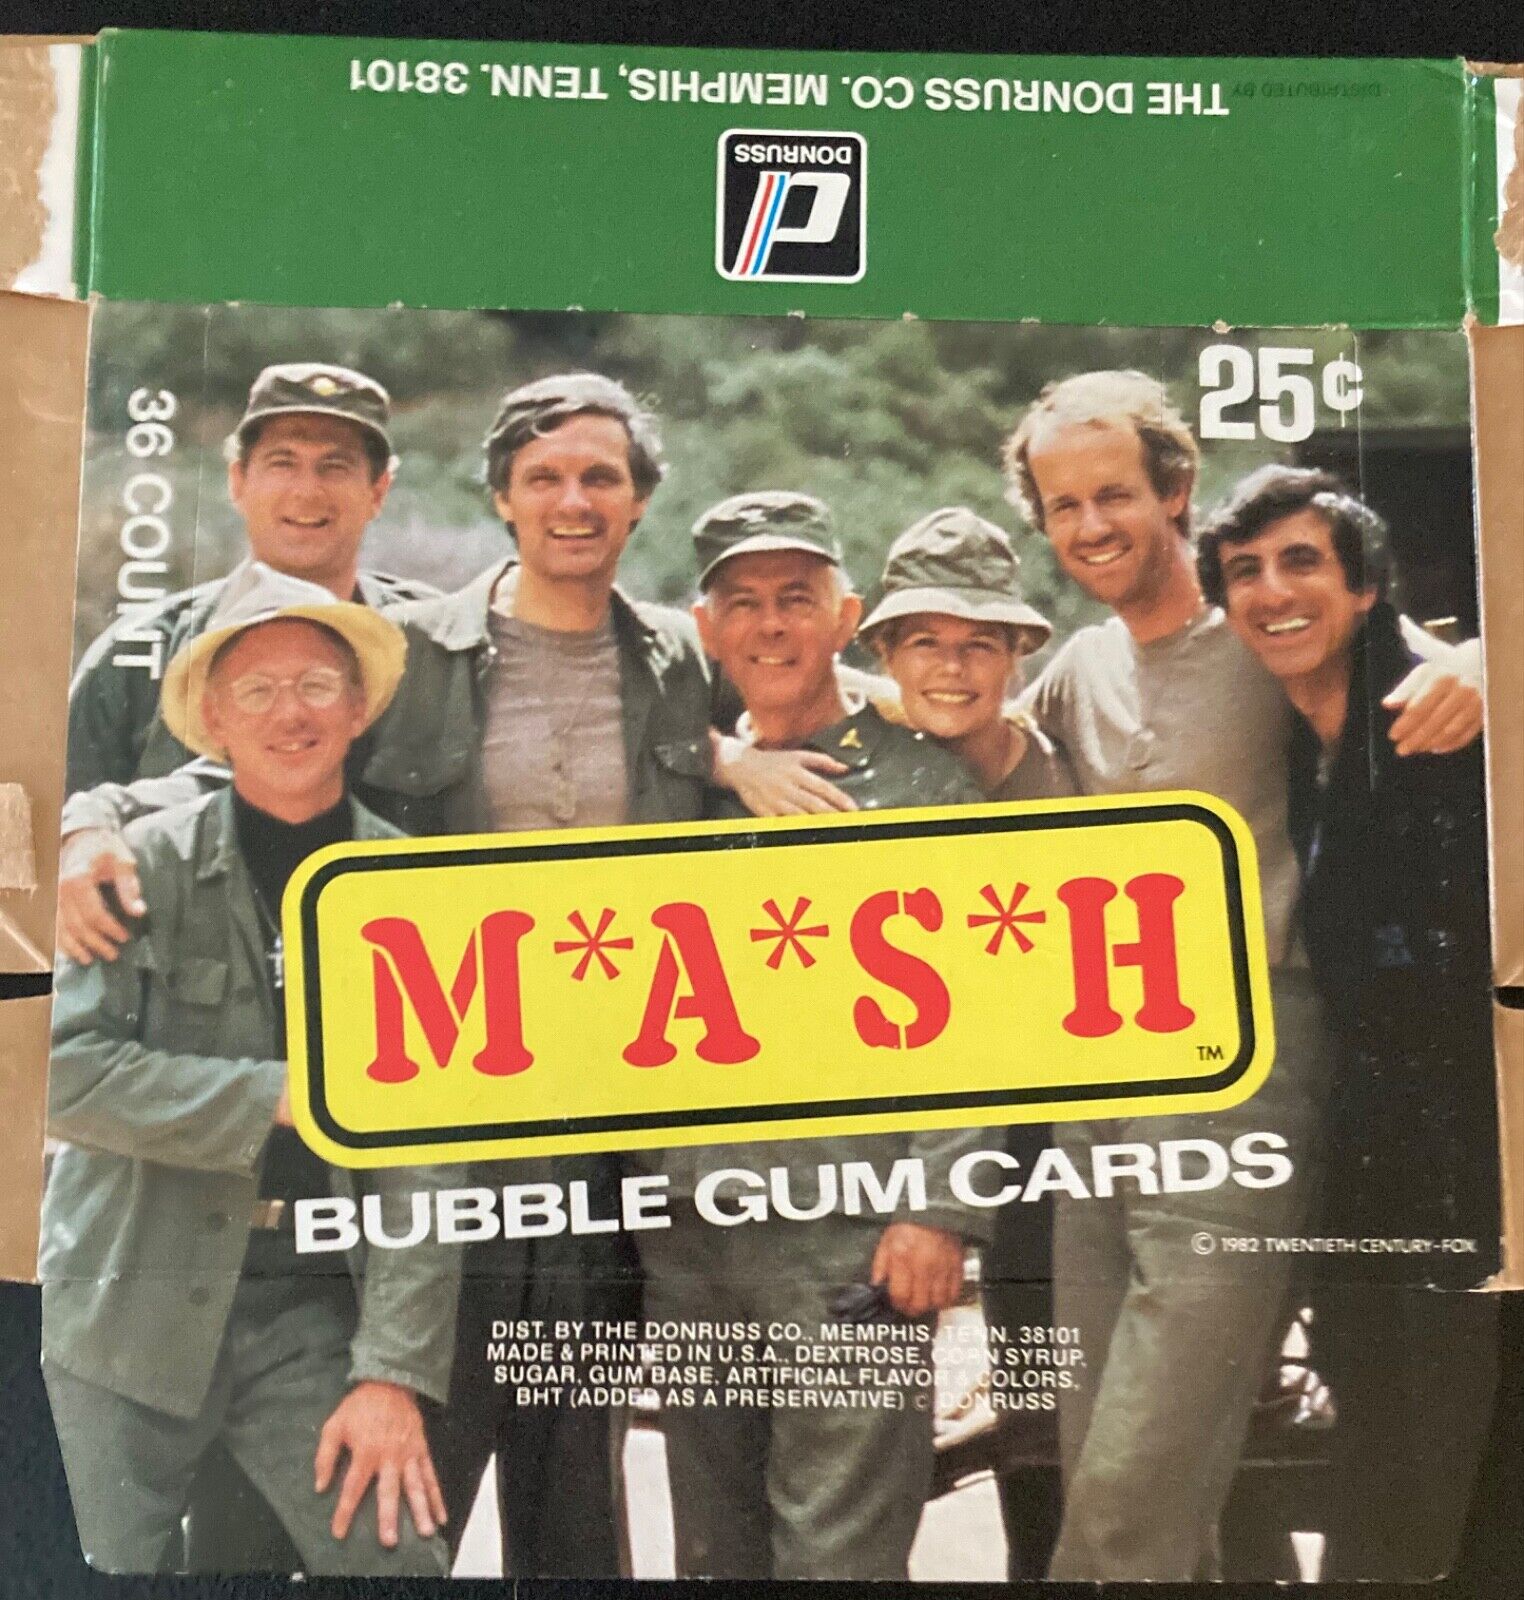 1982 Donruss Mash Empty Wax Box with Wrappers